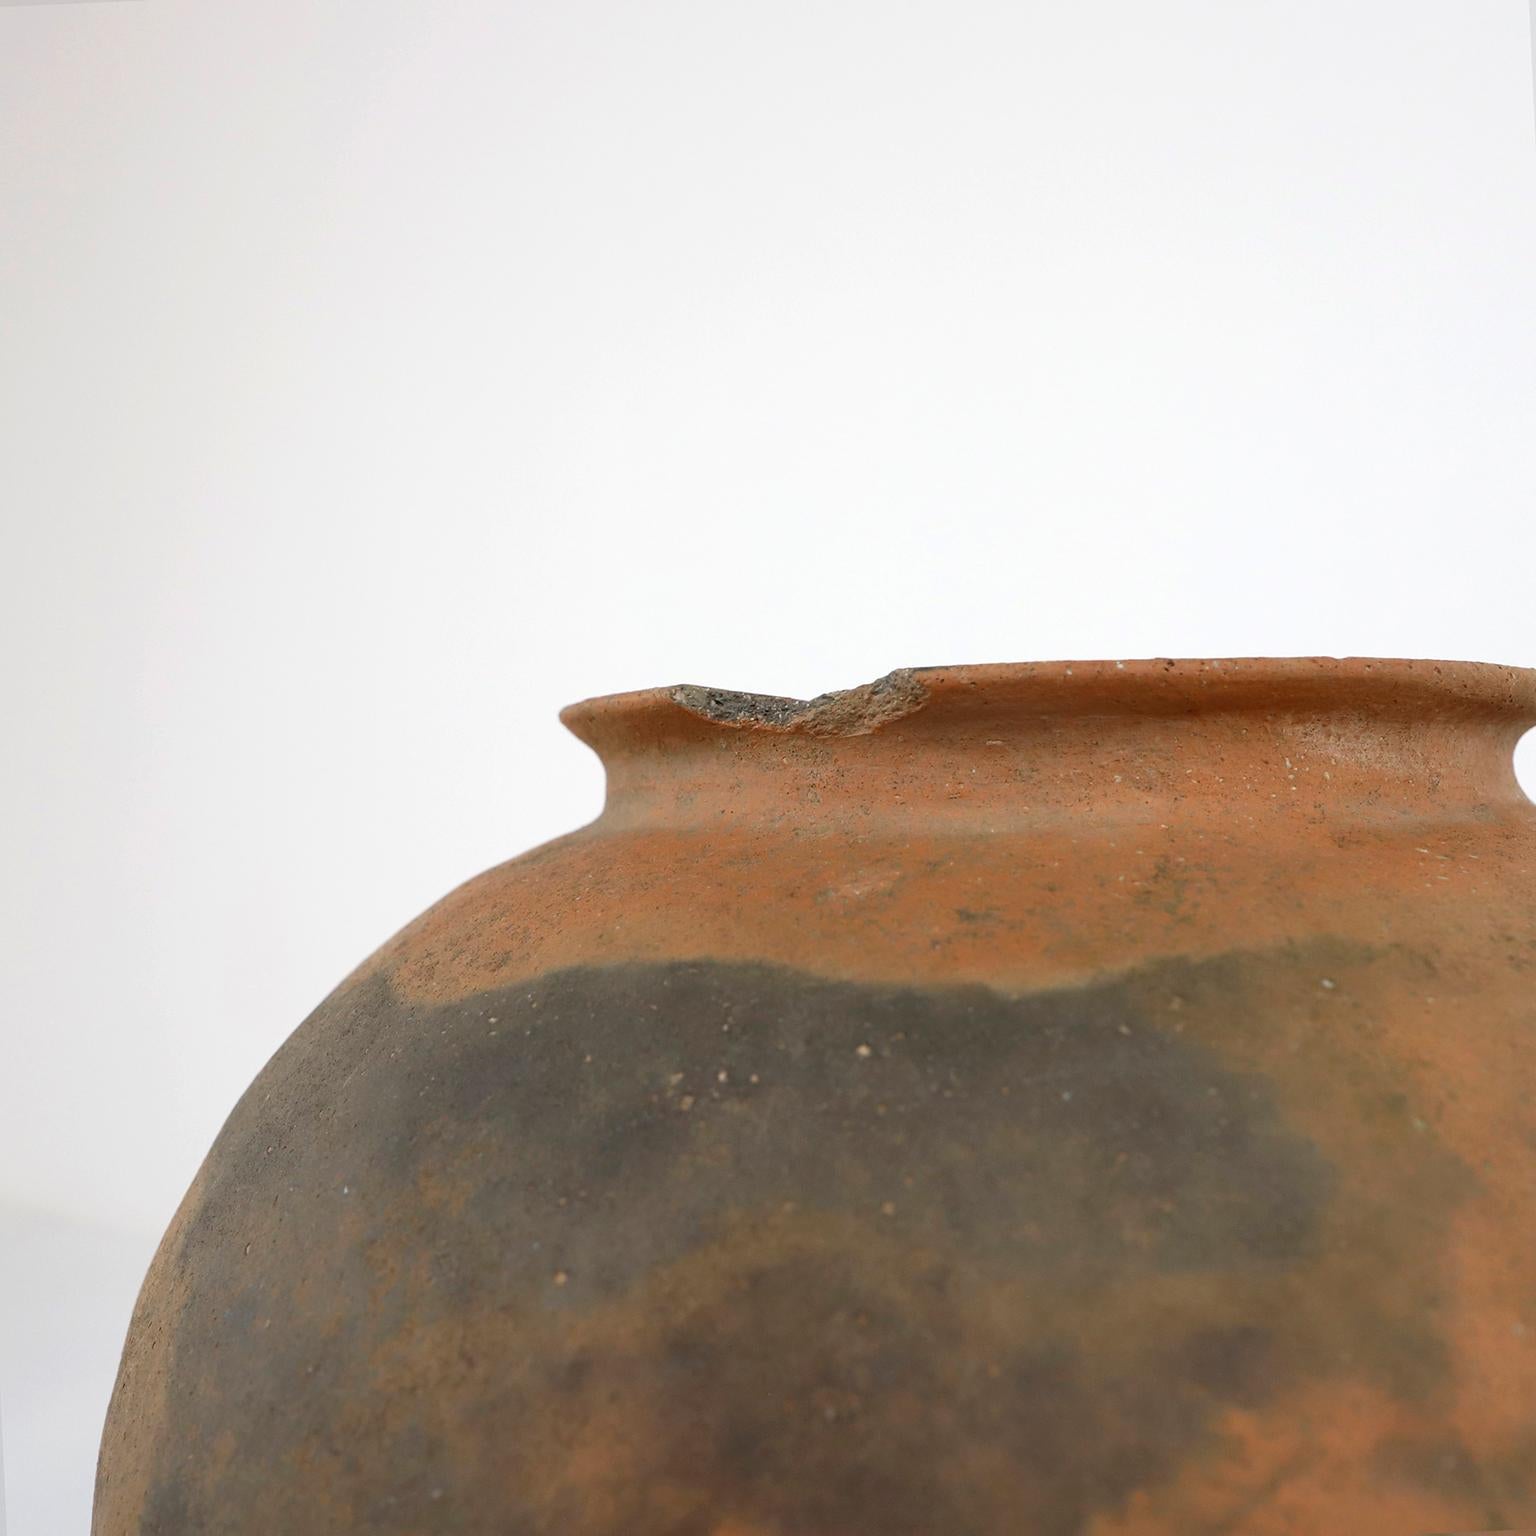 Circa 1940, we offer this fantastic ancient barro pot from Mexico, made in Puebla México hand crafted . This style of pottery is very rare, originally used for storing water from nearby rivers. Present some details over the top.